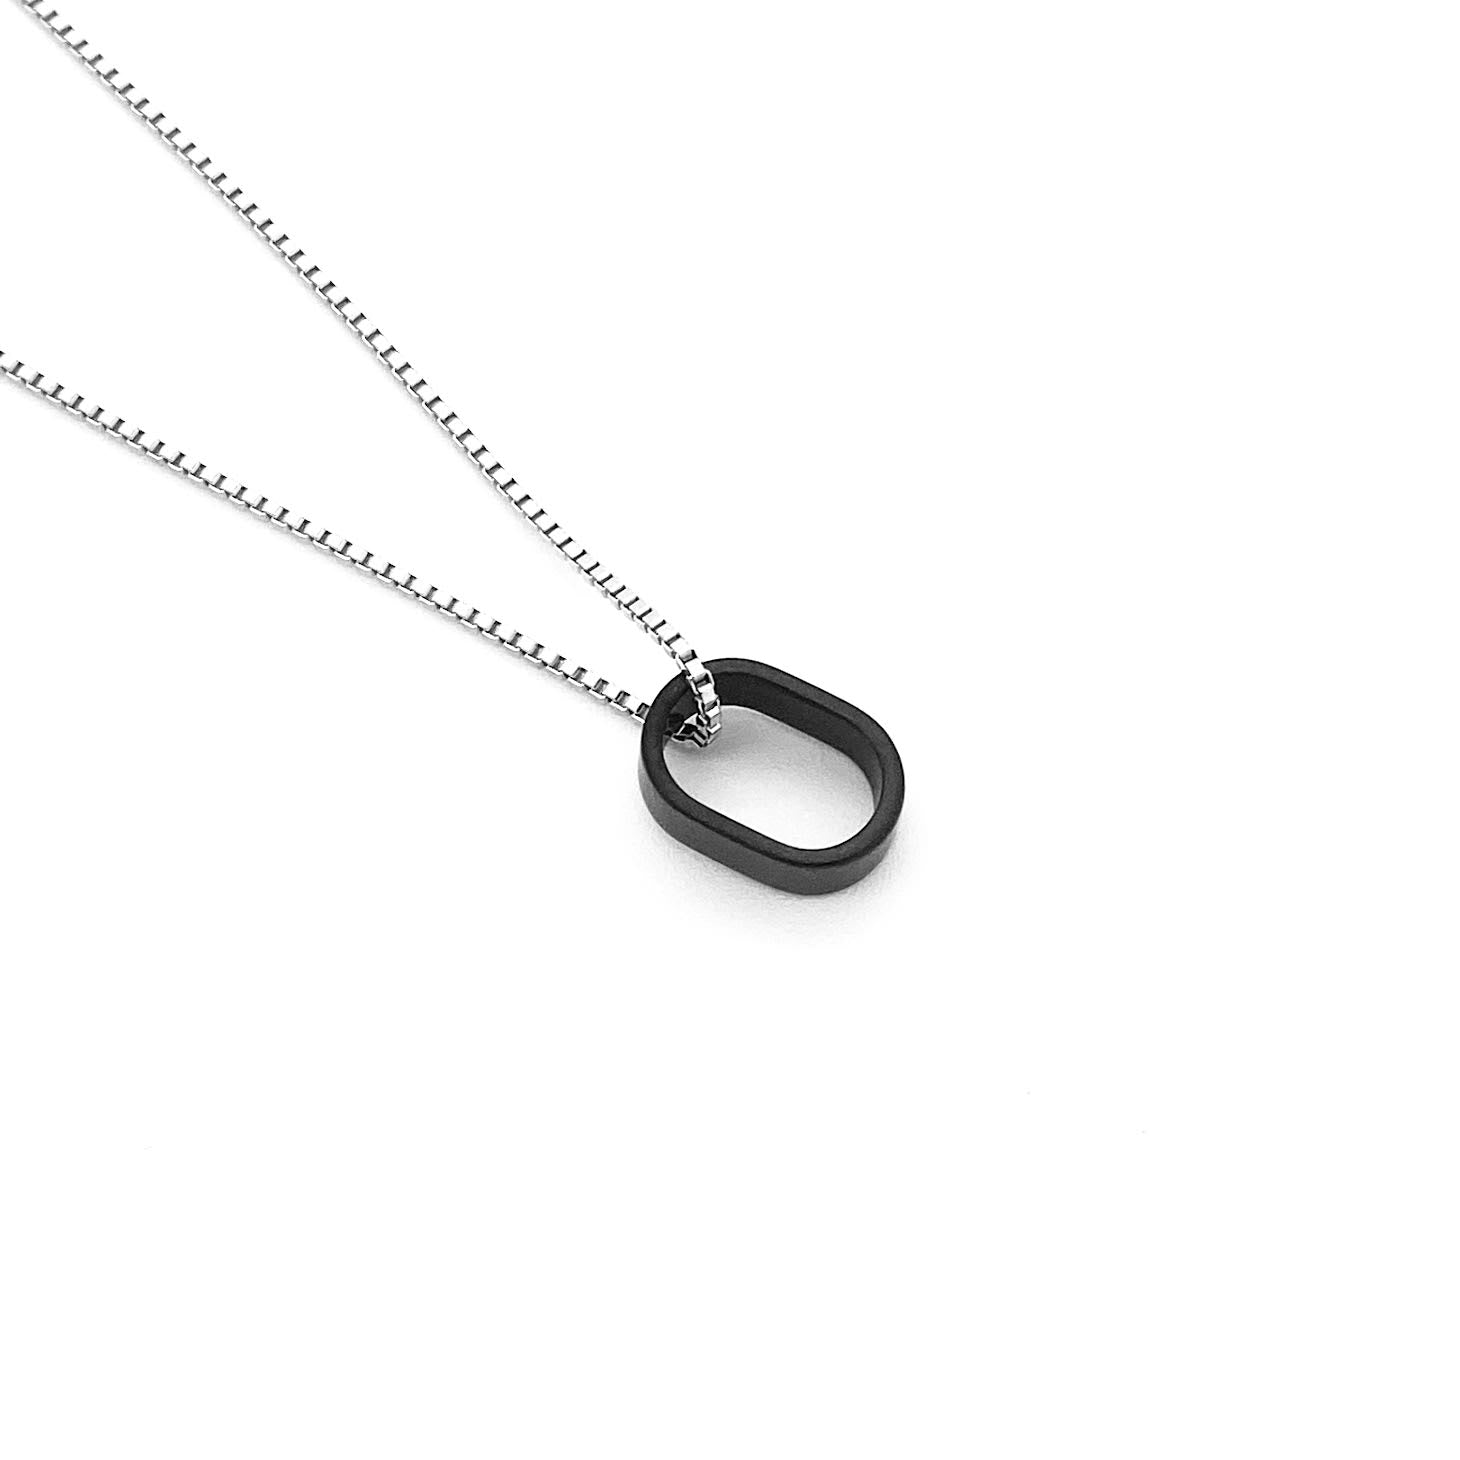 This meticulously designed, with a geometrical flavor, brushed black ceramic pendant necklace is perfect worn alone or paired with a WristBend stacking bracelet. Made by WristBend